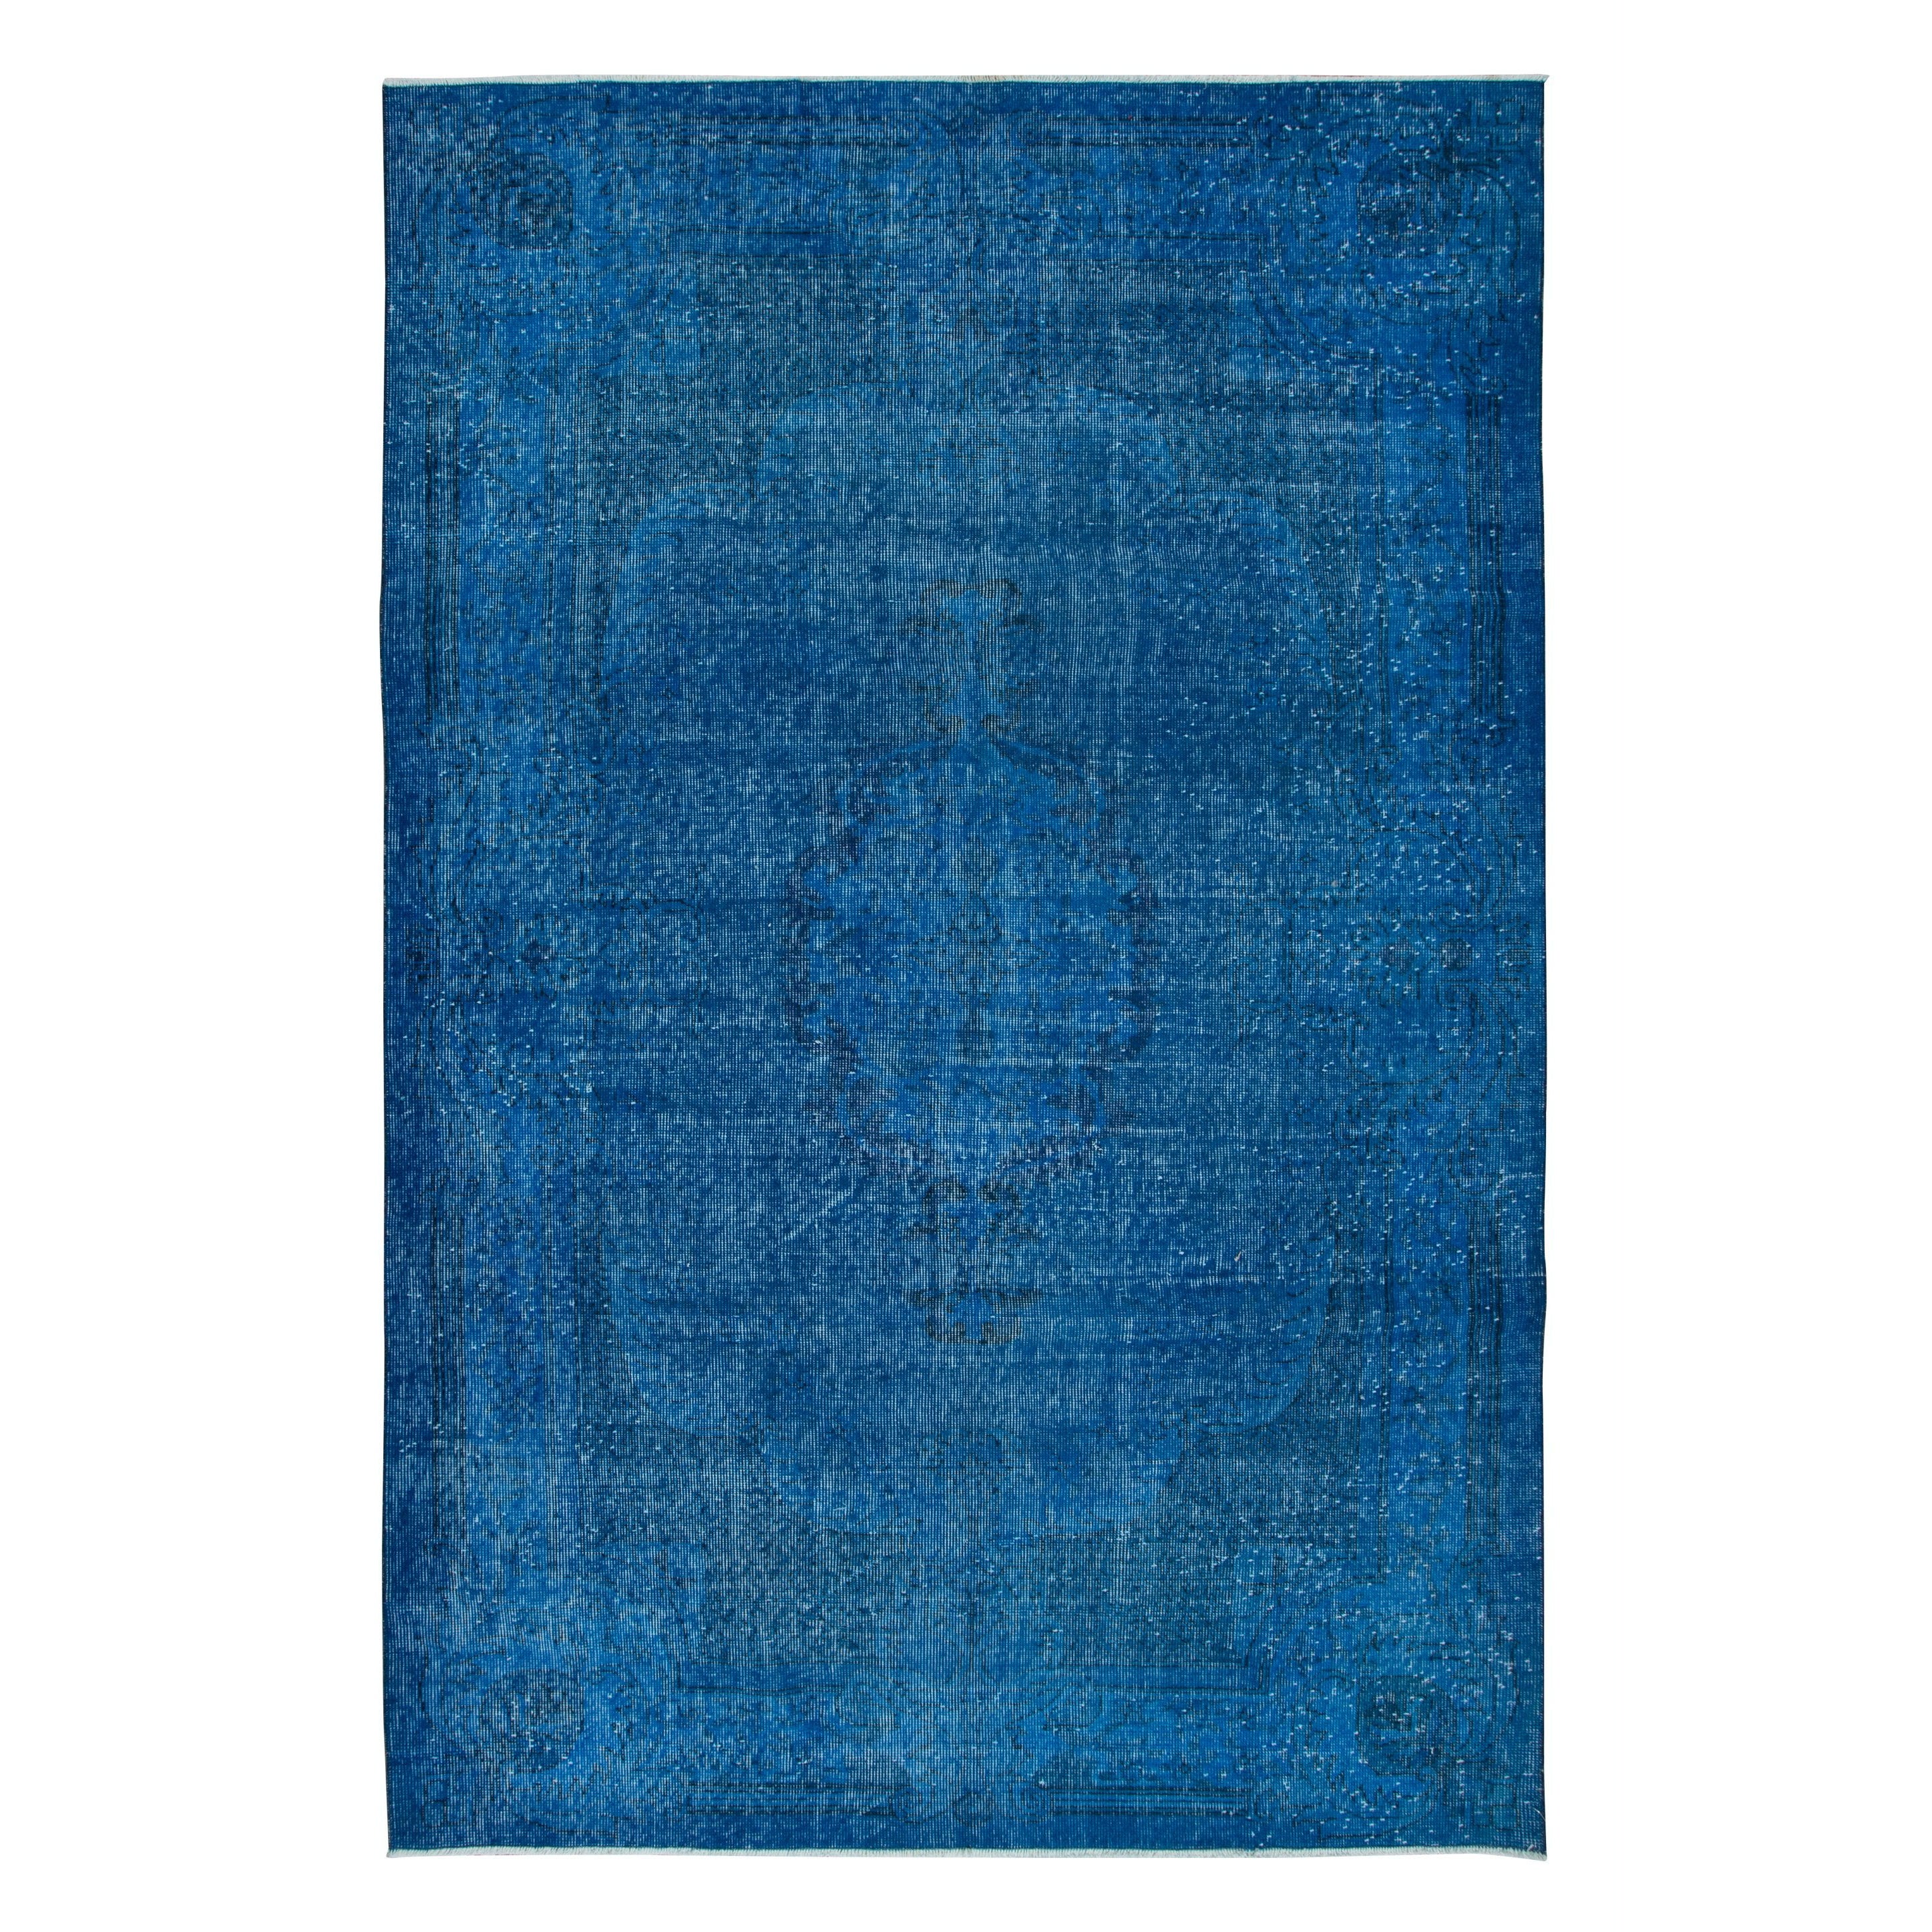 6x9 Ft Modern Blue Area Rug made of wool and cotton, Hand-Knotted in Turkey For Sale